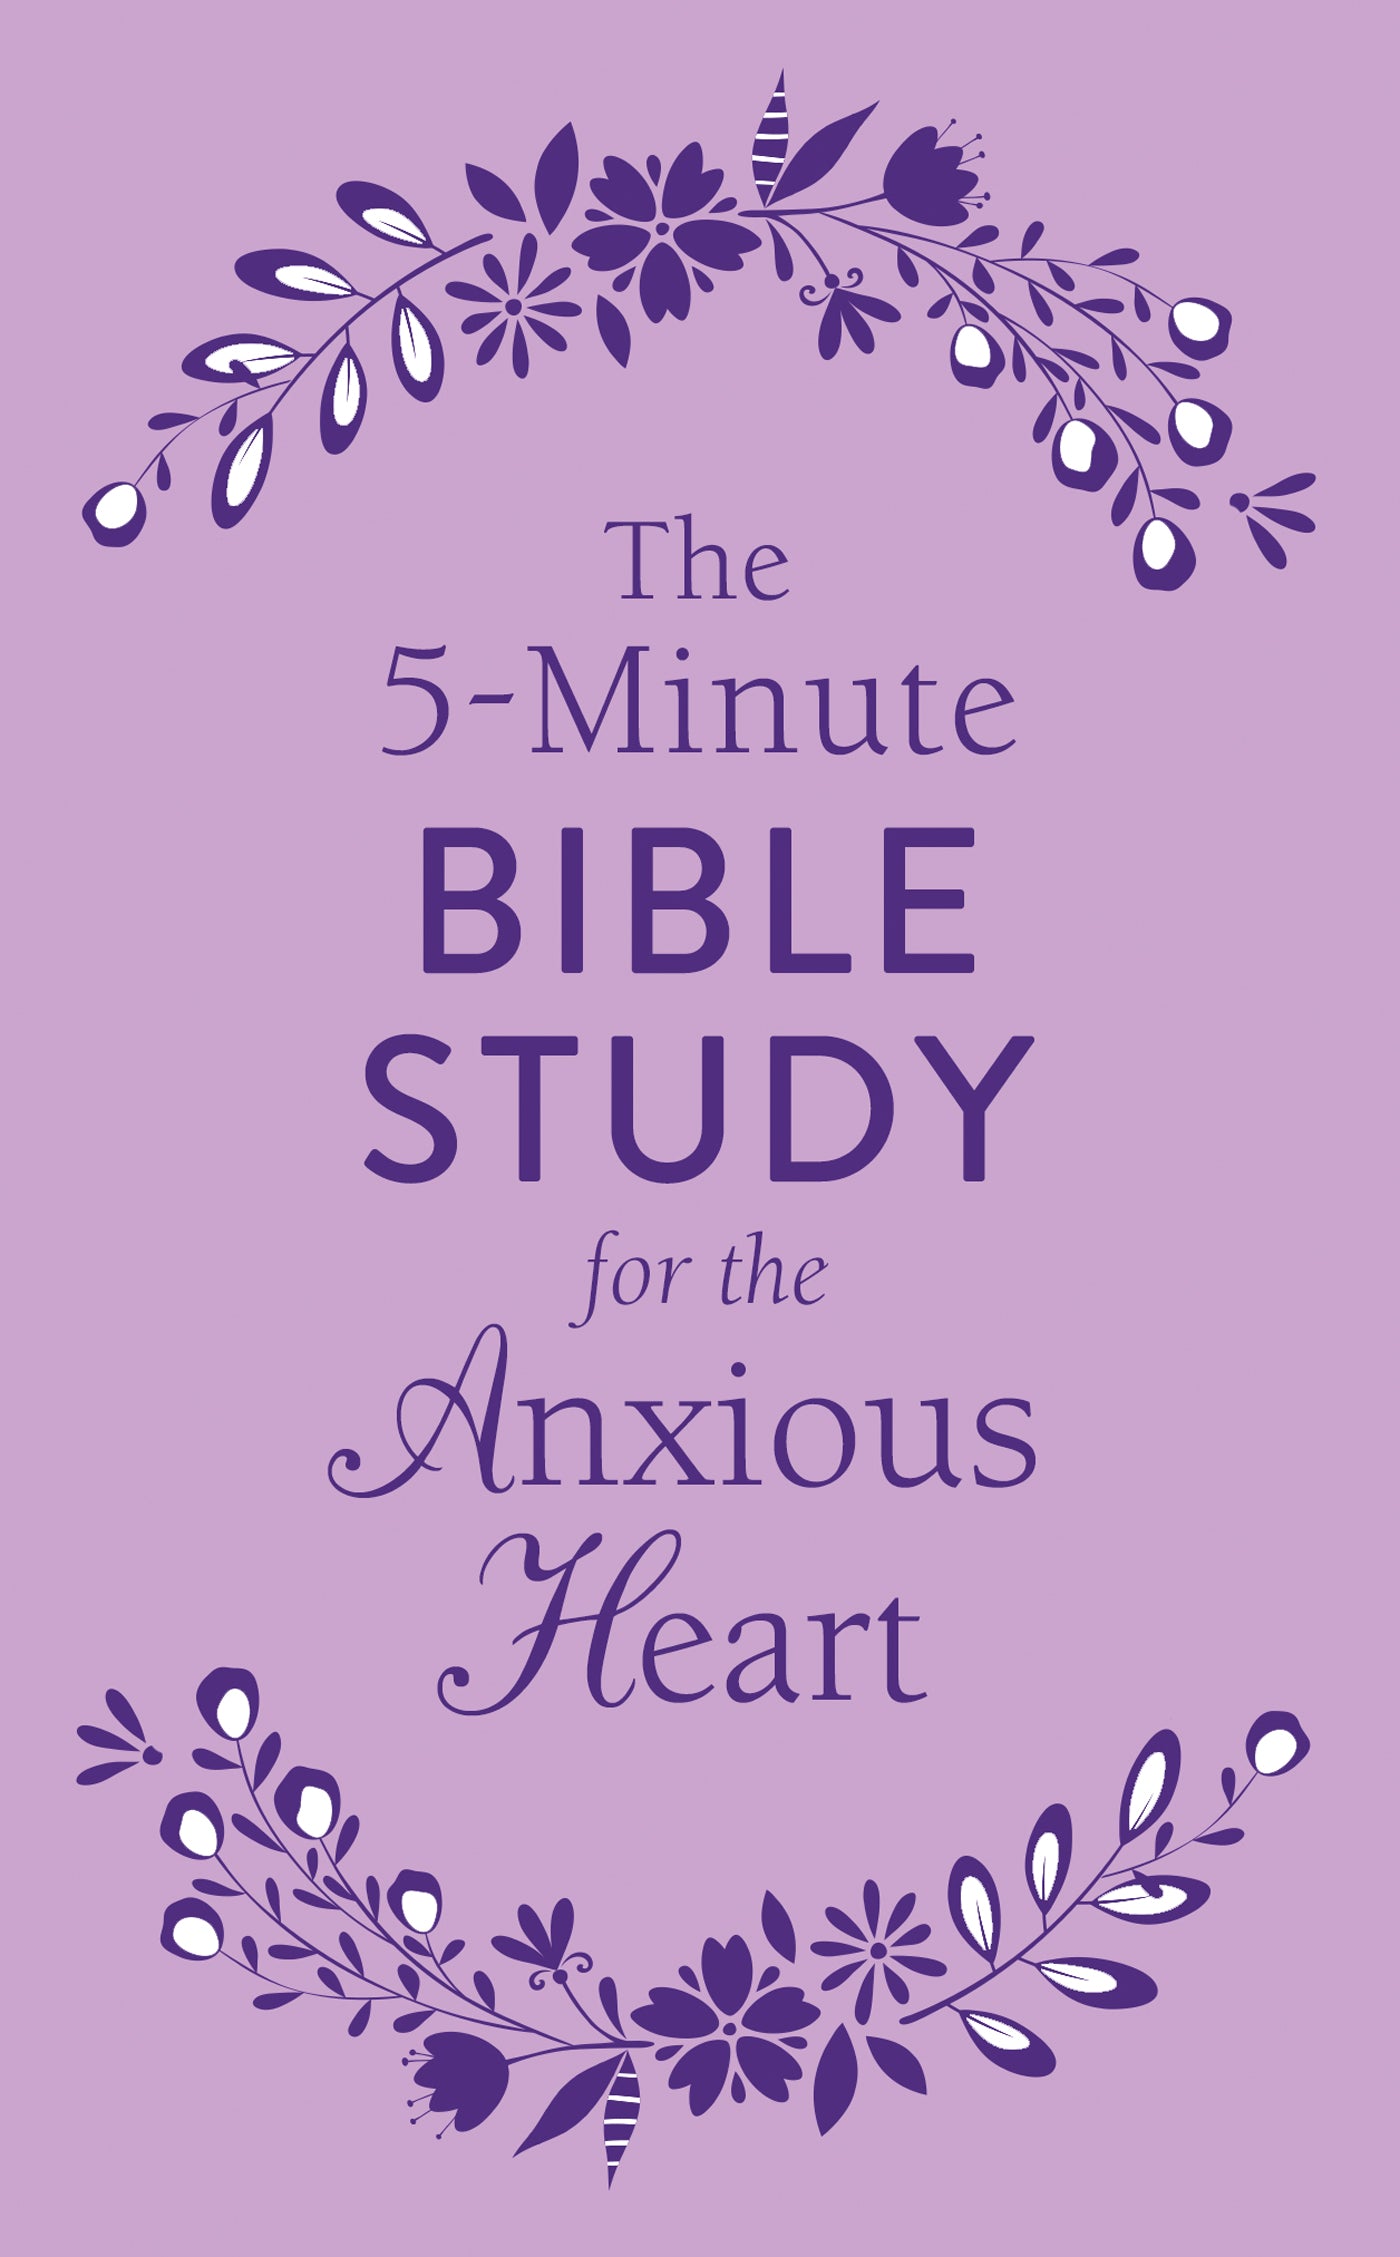 Image of The 5-Minute Bible Study for the Anxious Heart other